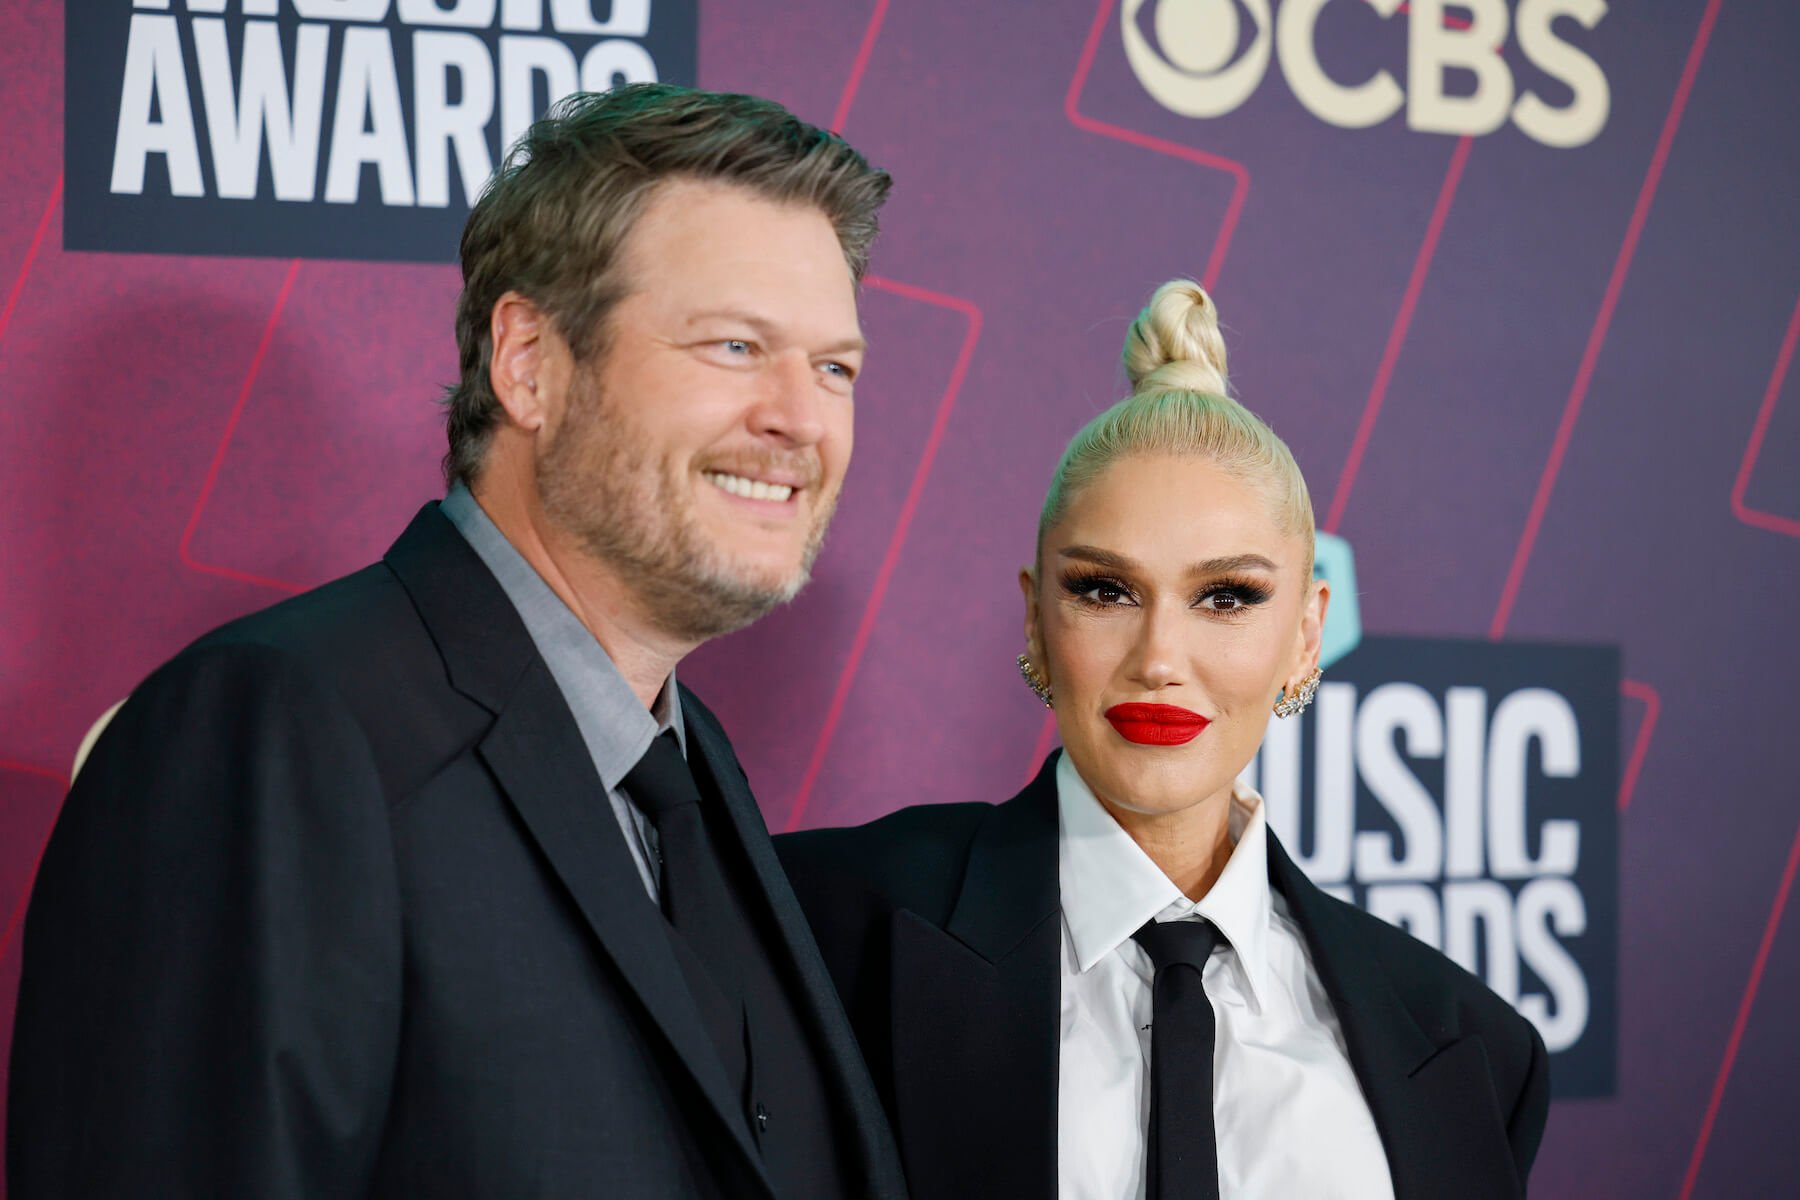 Blake Shelton and Gwen Stefani dressed in suits standing next to each other at the 2023 CMT Music Awards